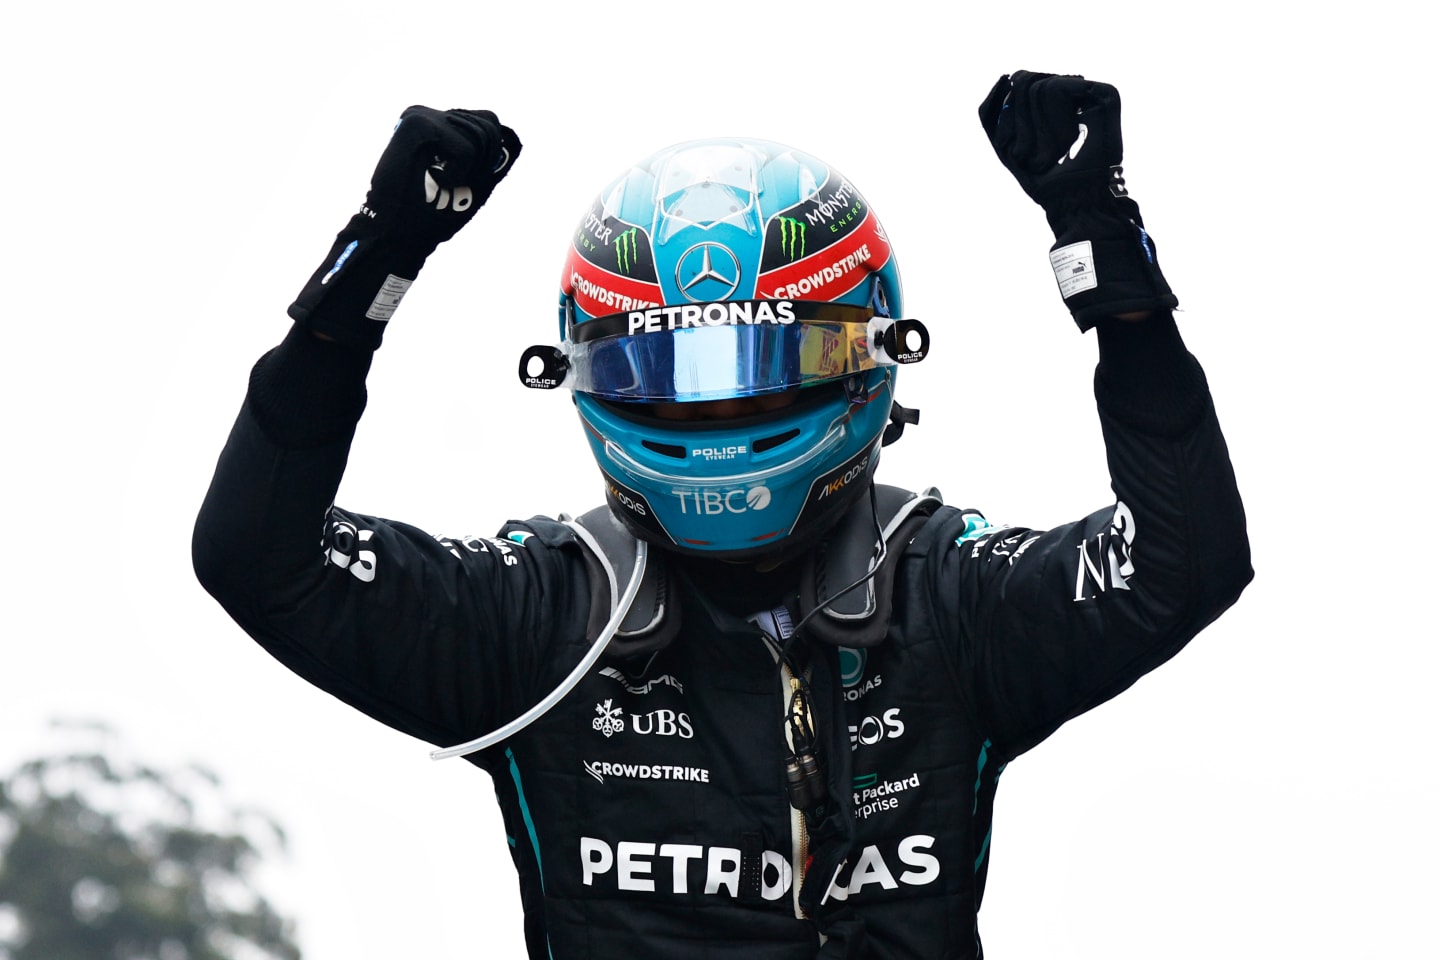 SAO PAULO, BRAZIL - NOVEMBER 13: Race winner George Russell of Great Britain and Mercedes celebrates in parc ferme during the F1 Grand Prix of Brazil at Autodromo Jose Carlos Pace on November 13, 2022 in Sao Paulo, Brazil. (Photo by Jared C. Tilton/Getty Images)